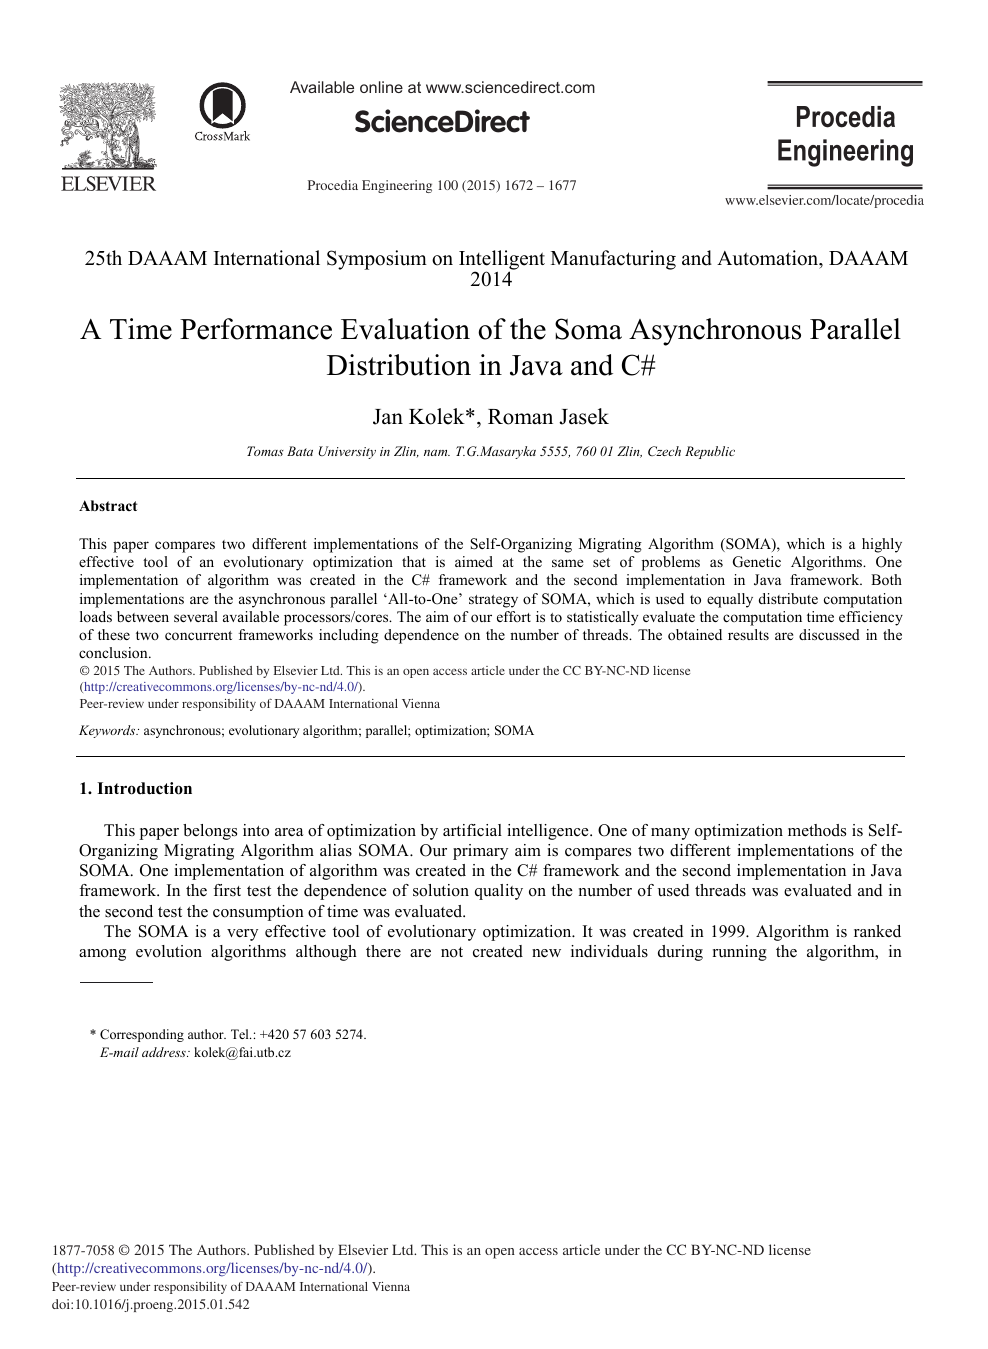 A Time Performance Evaluation Of The Soma Asynchronous Parallel Distribution In Java And C Topic Of Research Paper In Computer And Information Sciences Download Scholarly Article Pdf And Read For Free